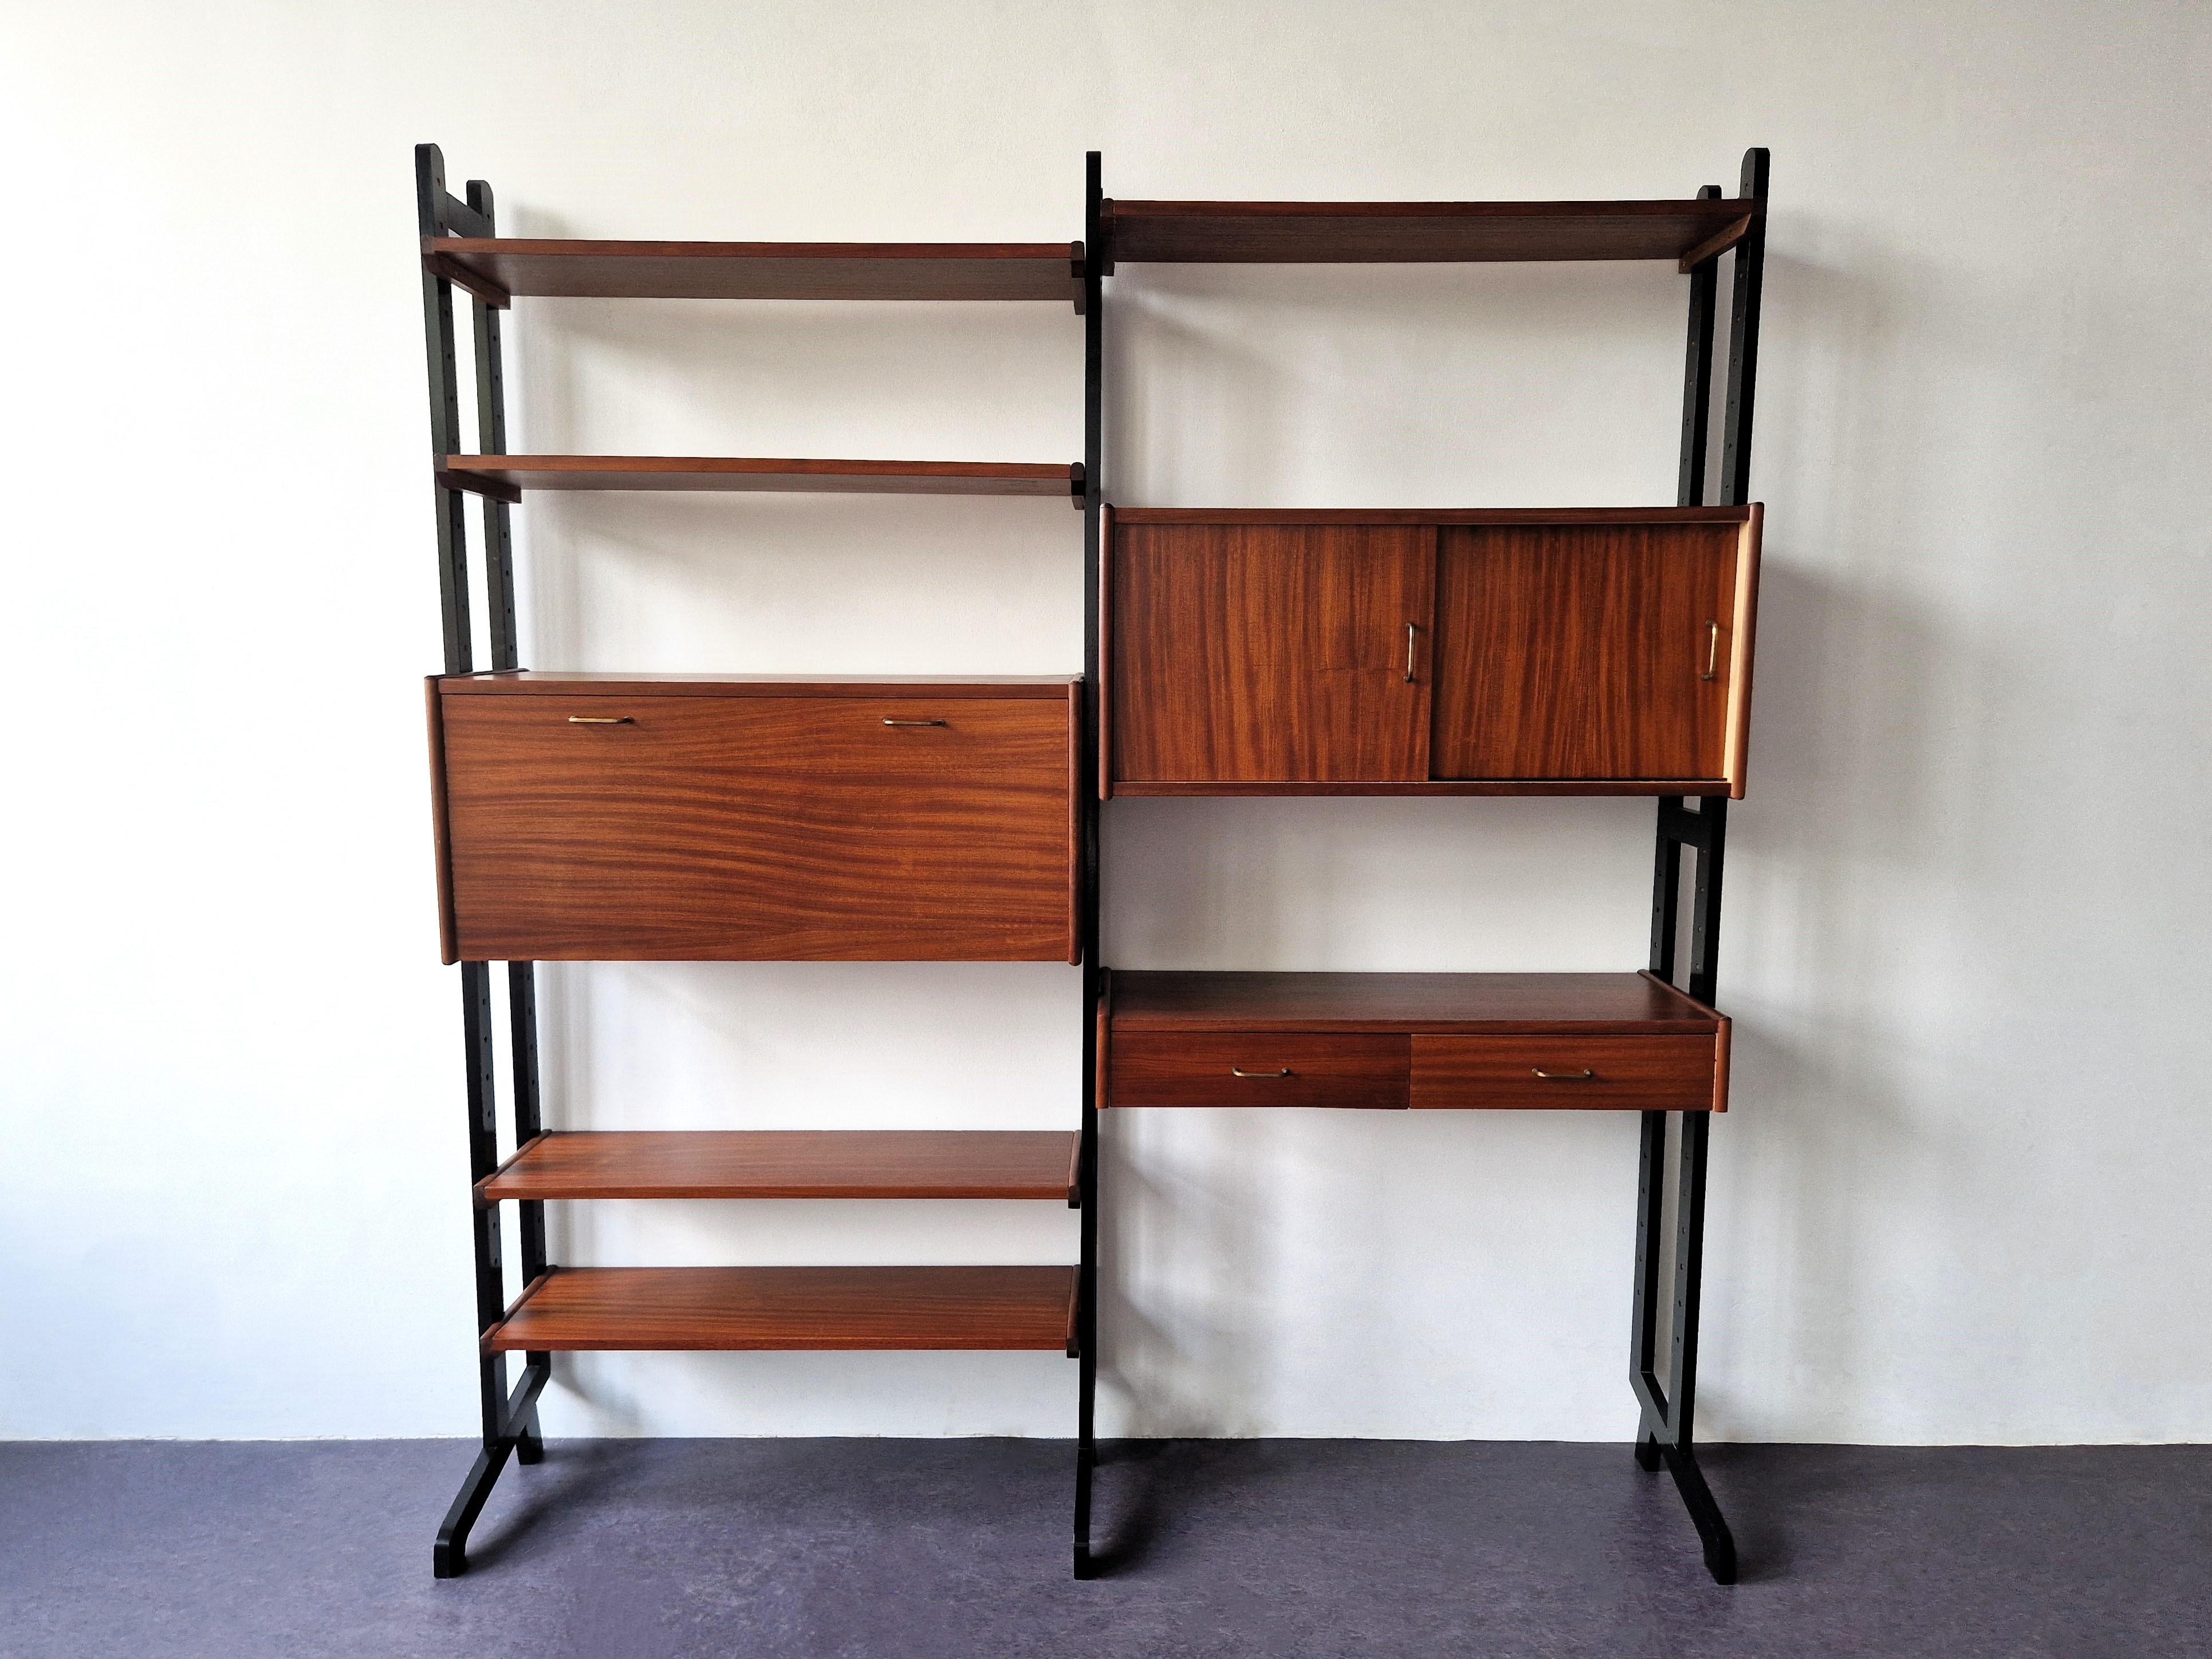 This lovely wall unit was produced by the Dutch furniture manufacturer Simpla Lux in the 1960's. It is a modular system that can be arranged according to your own wishes. The unit consists out of 3 black uprights, 5 shelves, a set of drawers, a